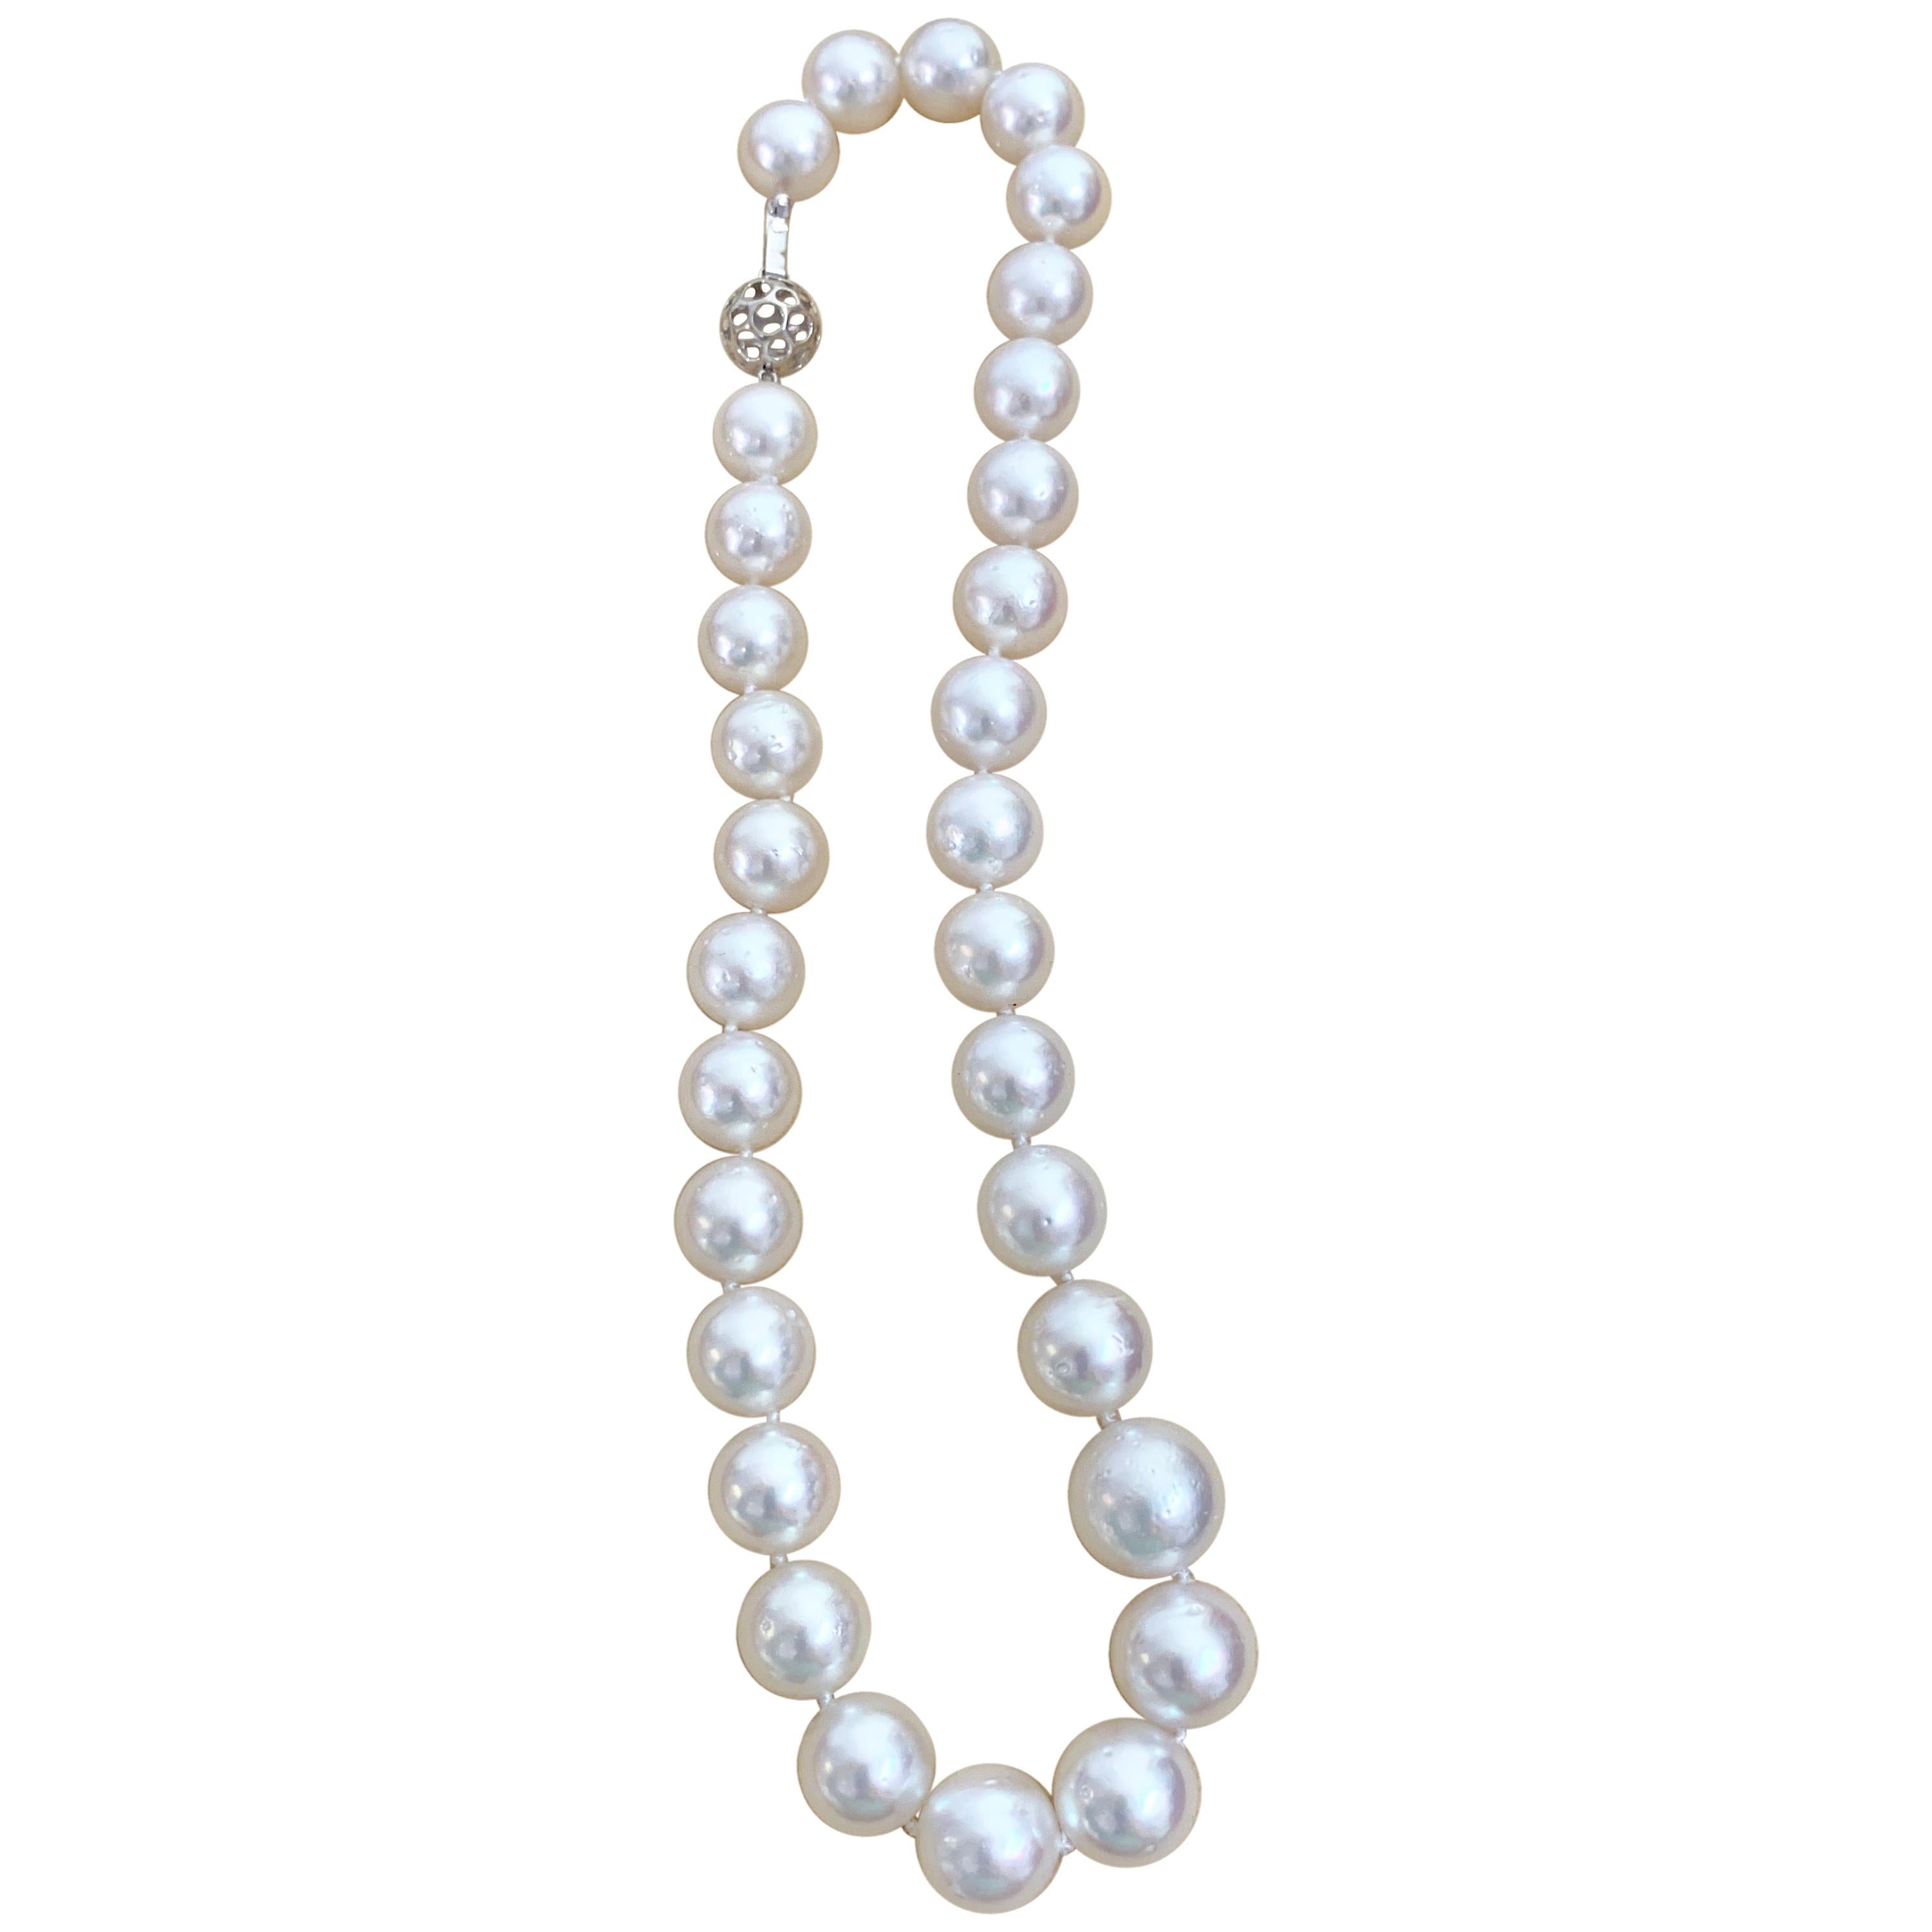 White South Sea Pearls Long Strand Necklace 14 Karat Gold Clasp For Sale